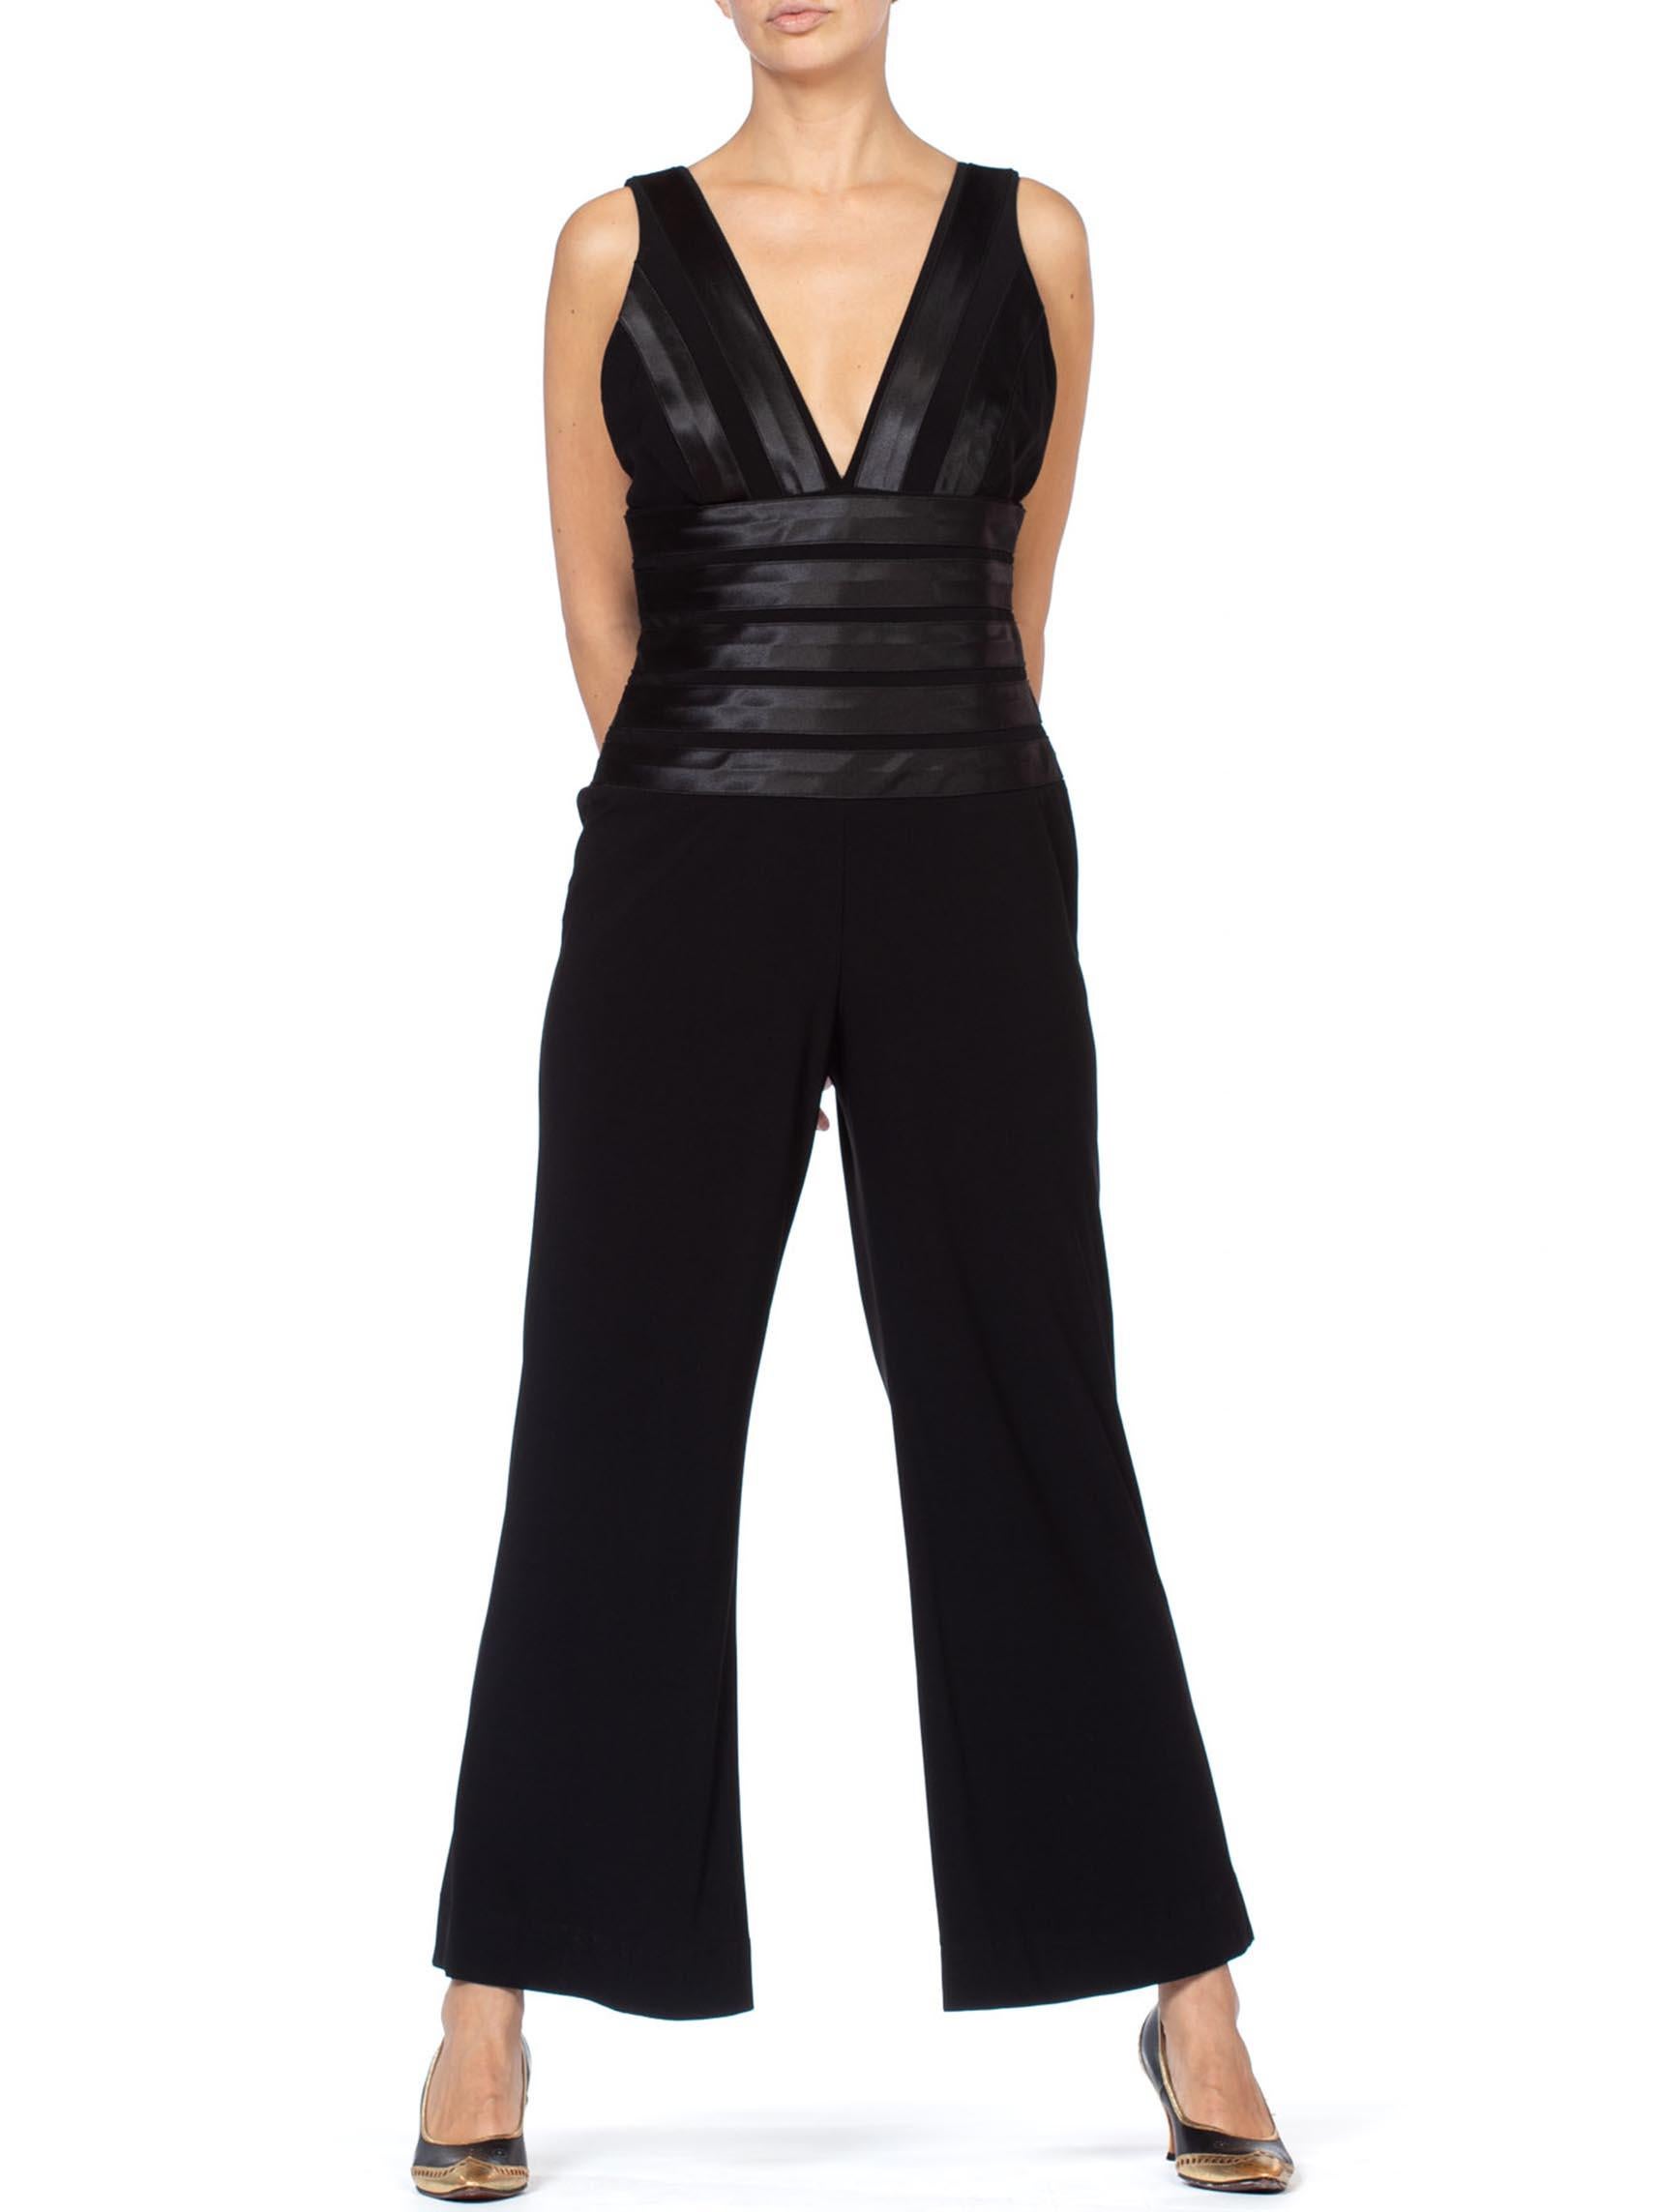 Women's 1980S Black Polyester Jumpsuit With Satin Stripe Details